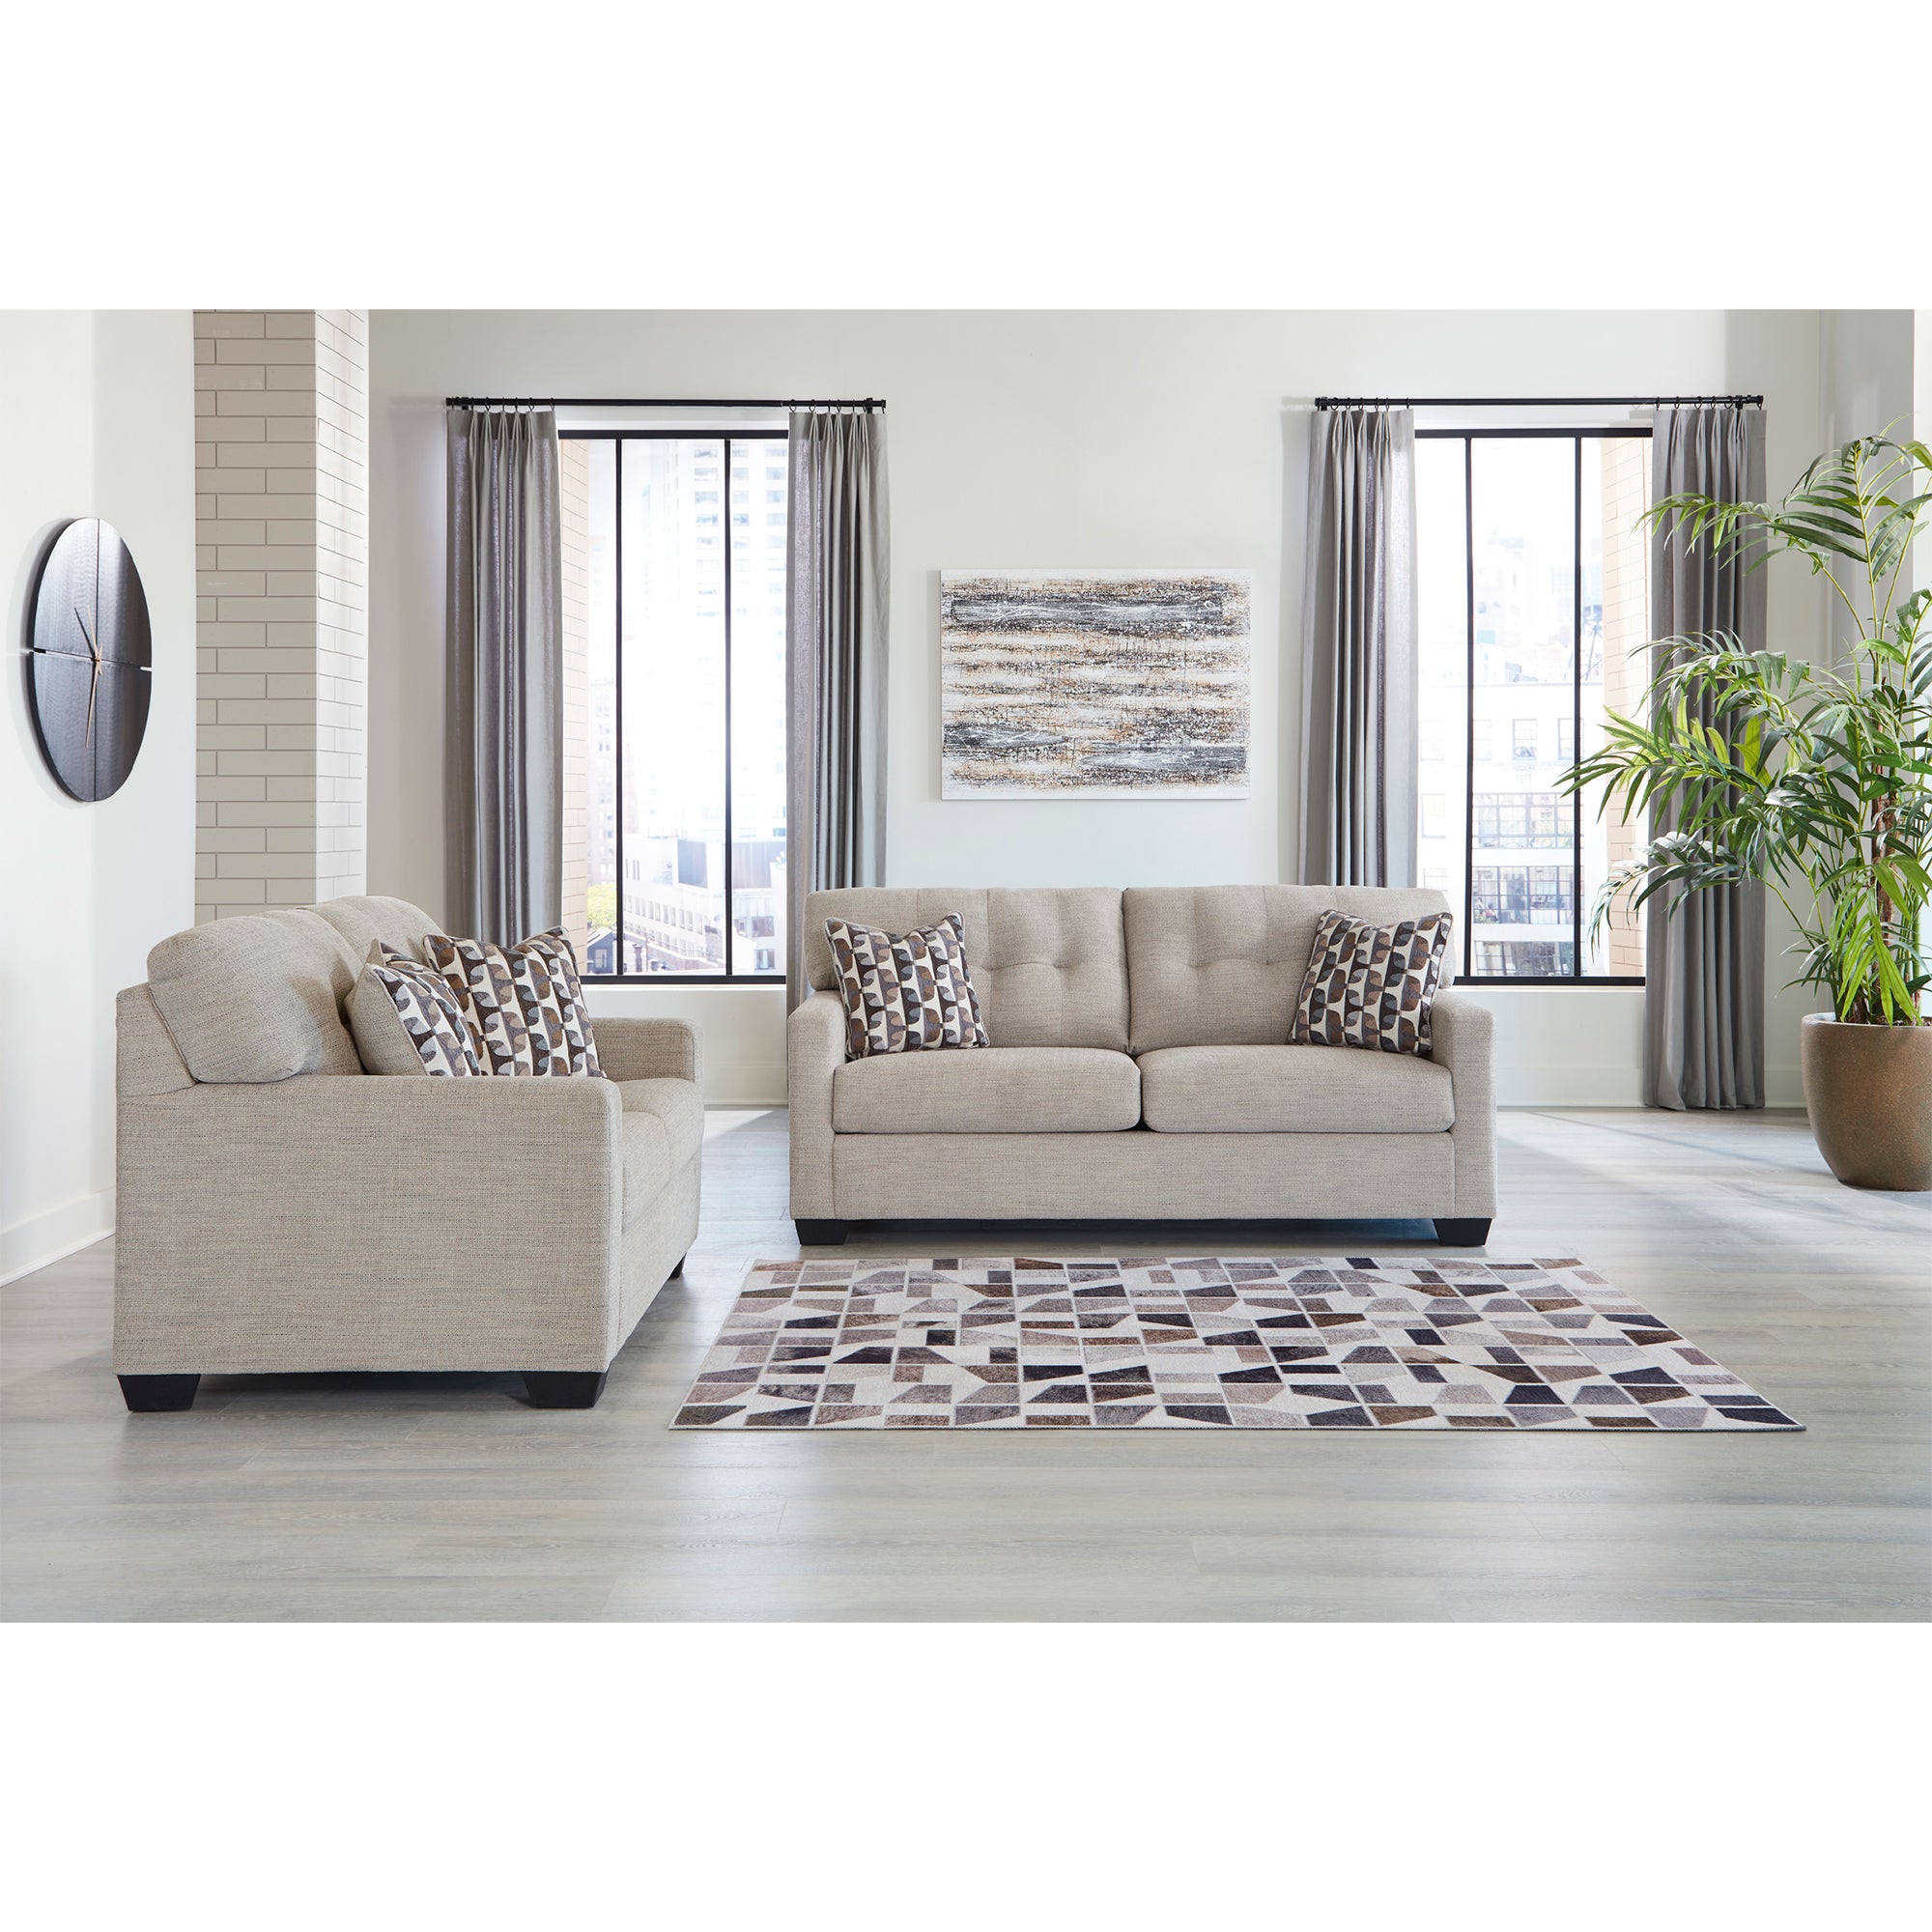 Luxurious pebble-colored Mahoney Sofa and Loveseat, perfect for elegant lounging in Milwaukee